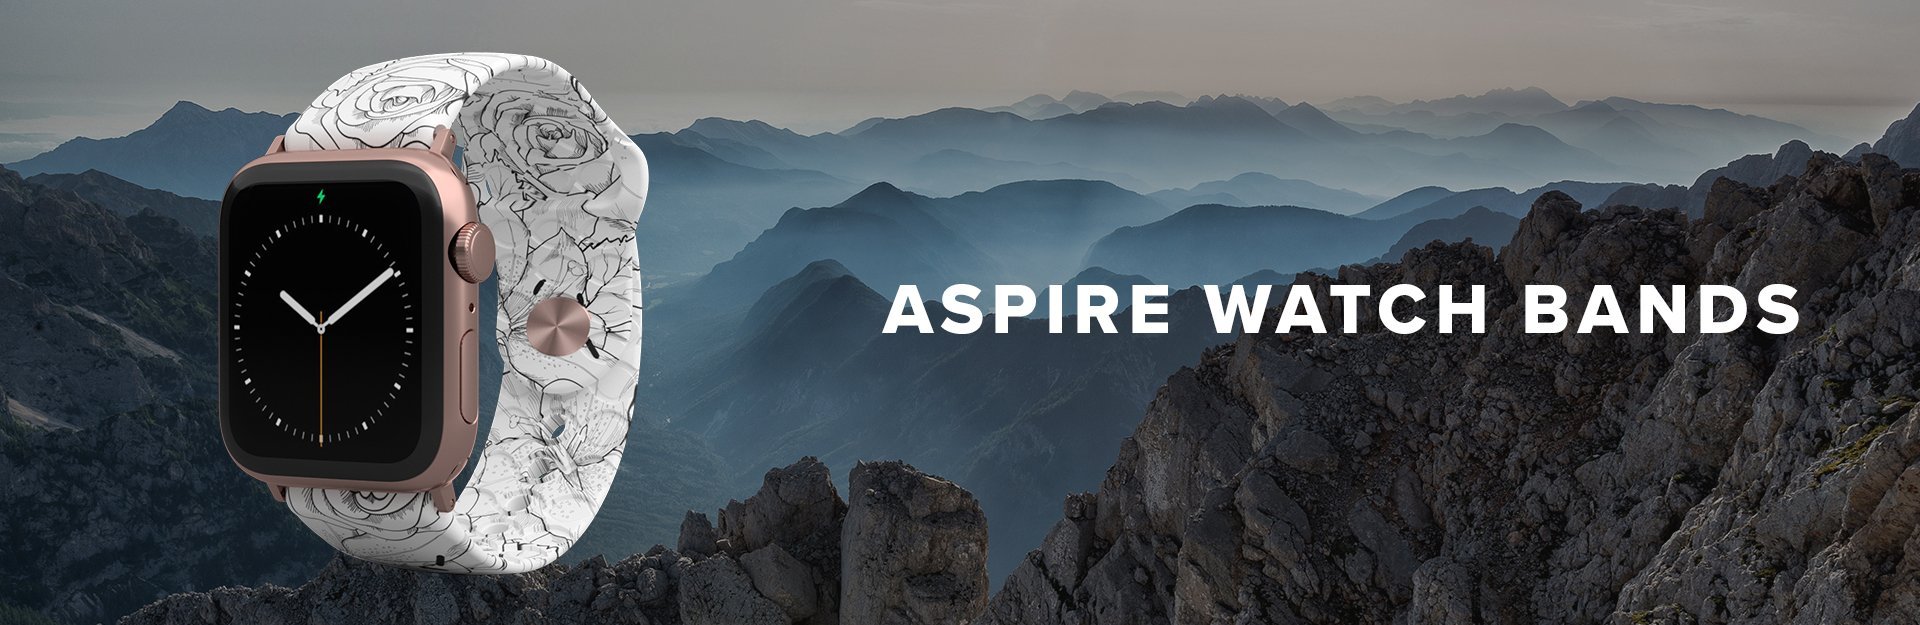 Aspire Watch Bands, a Winter Rose watch band is overlaid on very rocky mountains